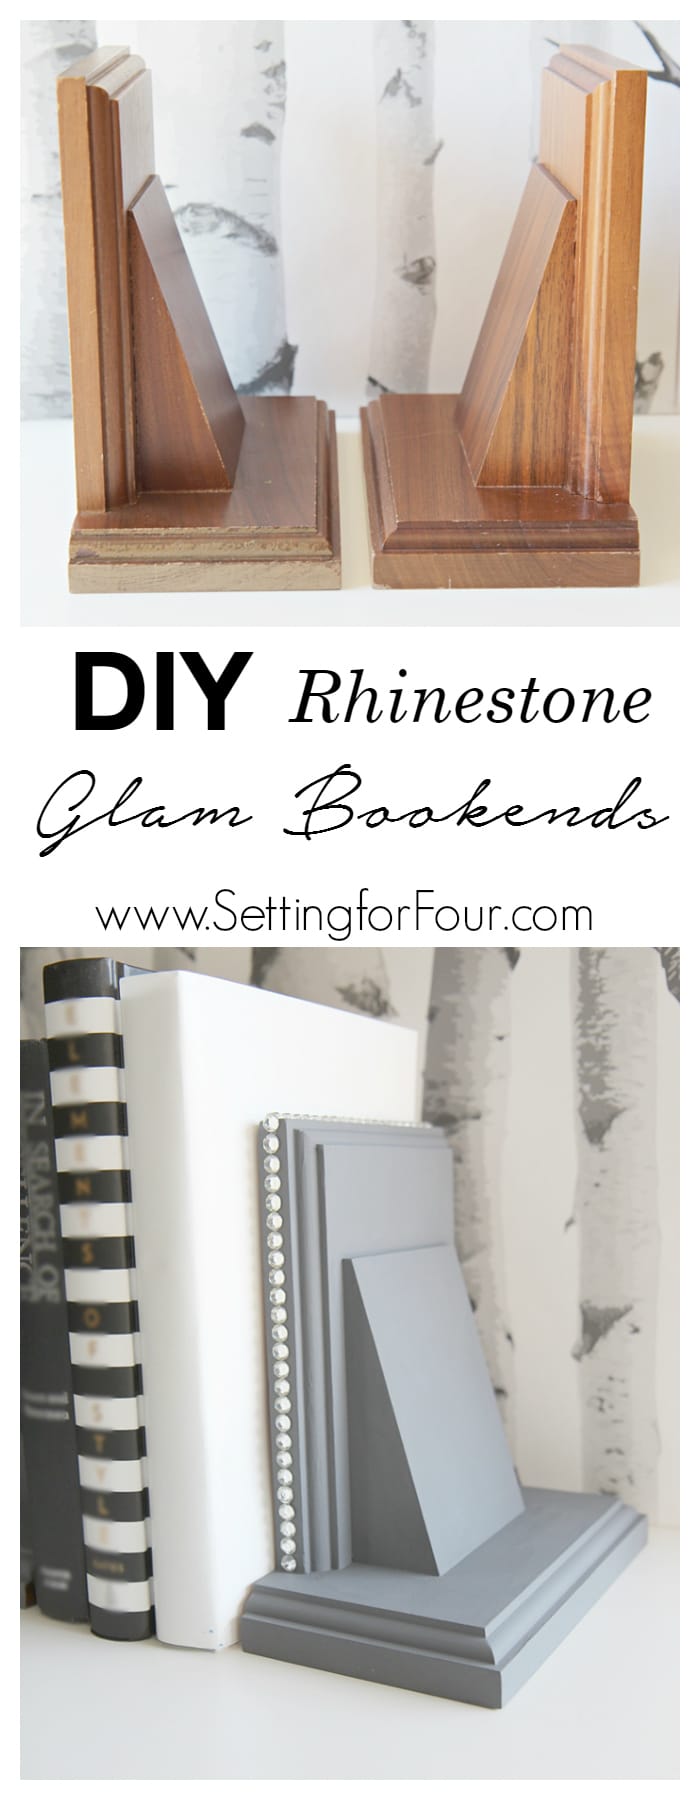 DIY home decor on a budget - How to make DIY Rhinestone Glam Bookends! See the glam makeover I gave two boring thrift store bookends using chalky finish paint and rhinestone studding! Great gift idea. www.settingforfour.com